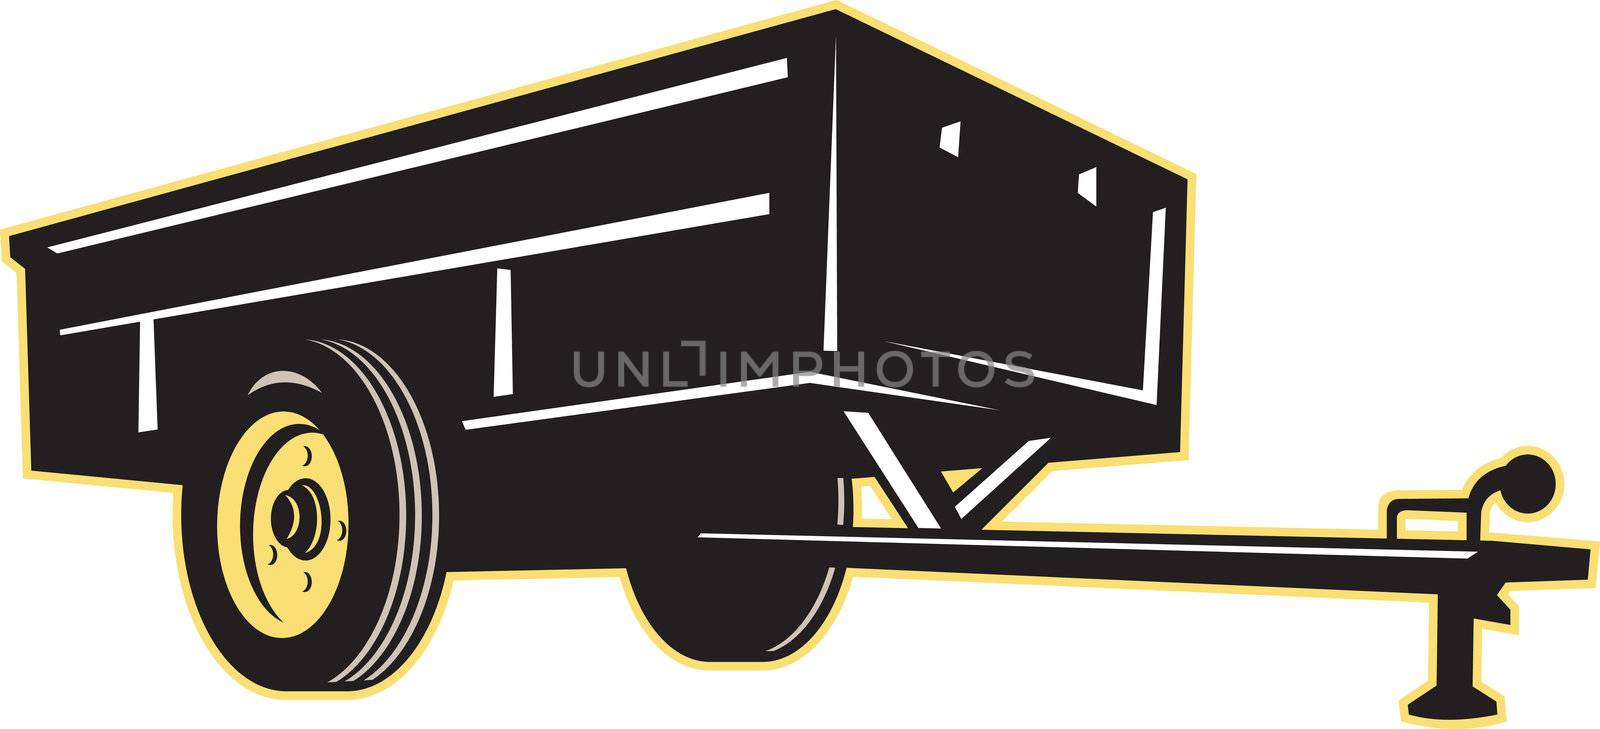 illustration of a car garden lawn utility trailer side on isolated white background
